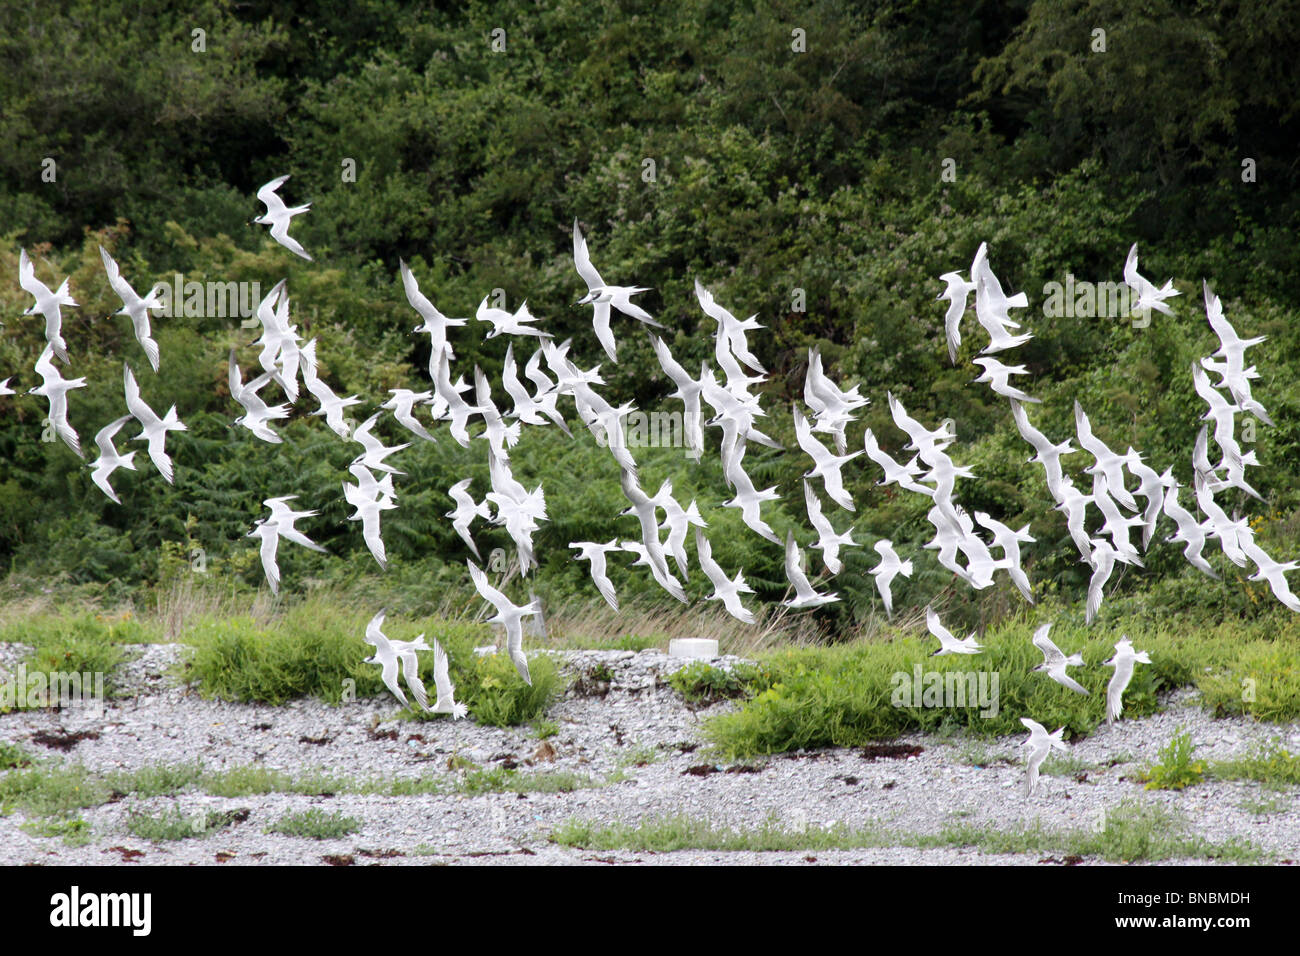 Flock Of Sandwich Terns Sterna sandvicensis On Anglesey, Wales, UK Stock Photo